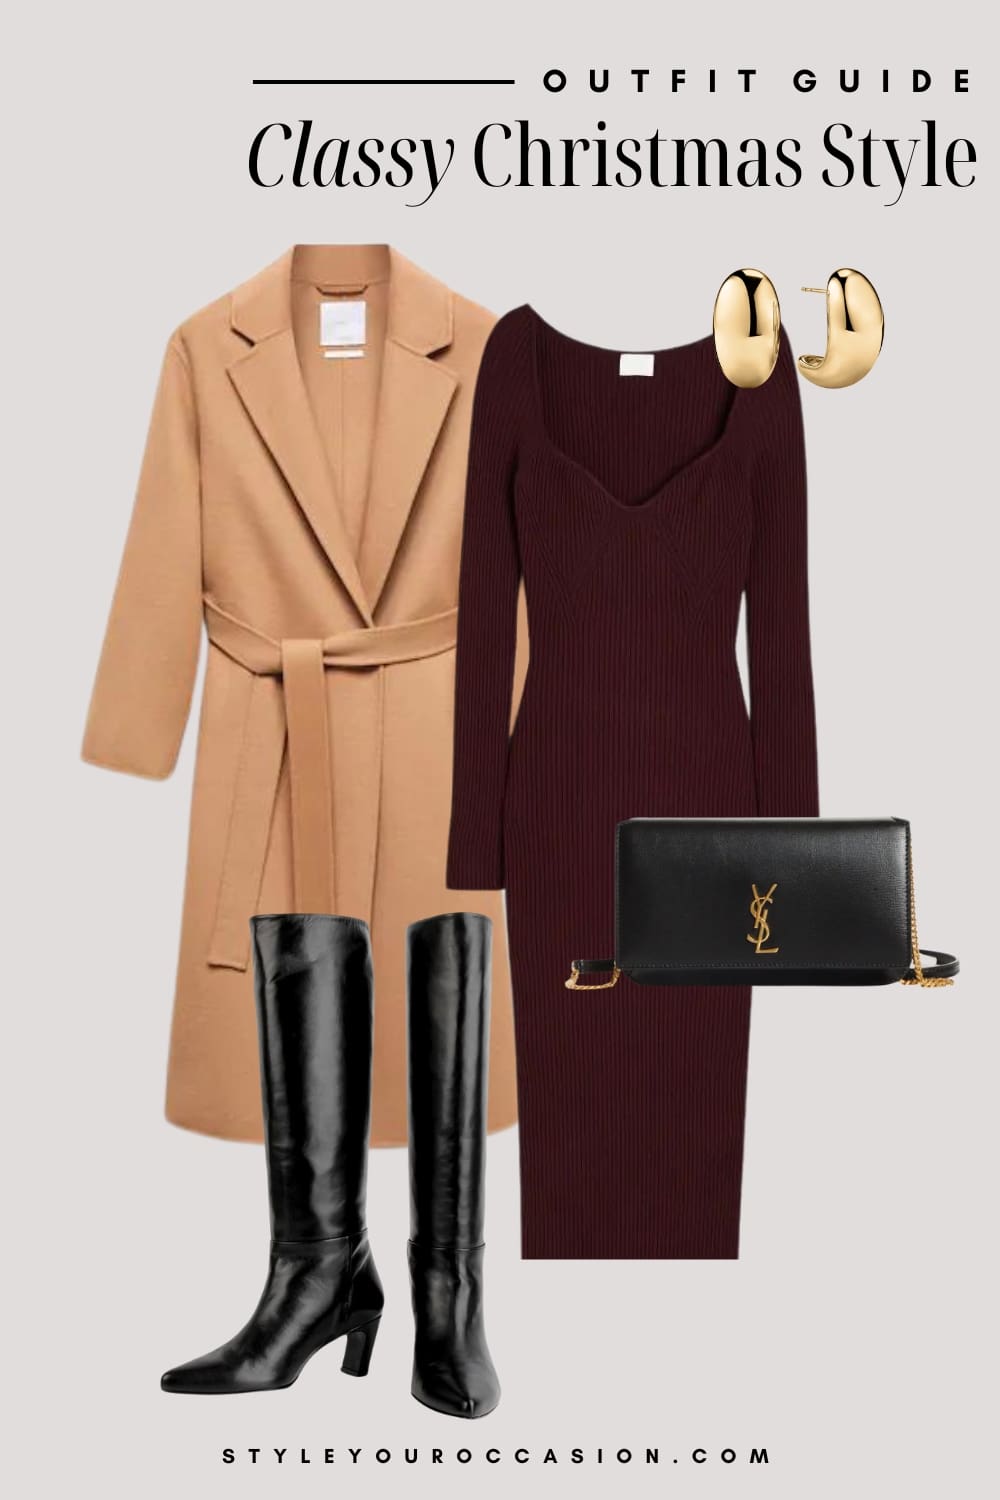 An image board of a Christmas outfit featuring a burgundy knit midi dress, a long camel wool coat, knee-high black leather boots, chunky gold hoop earrings, and a black leather crossbody purse